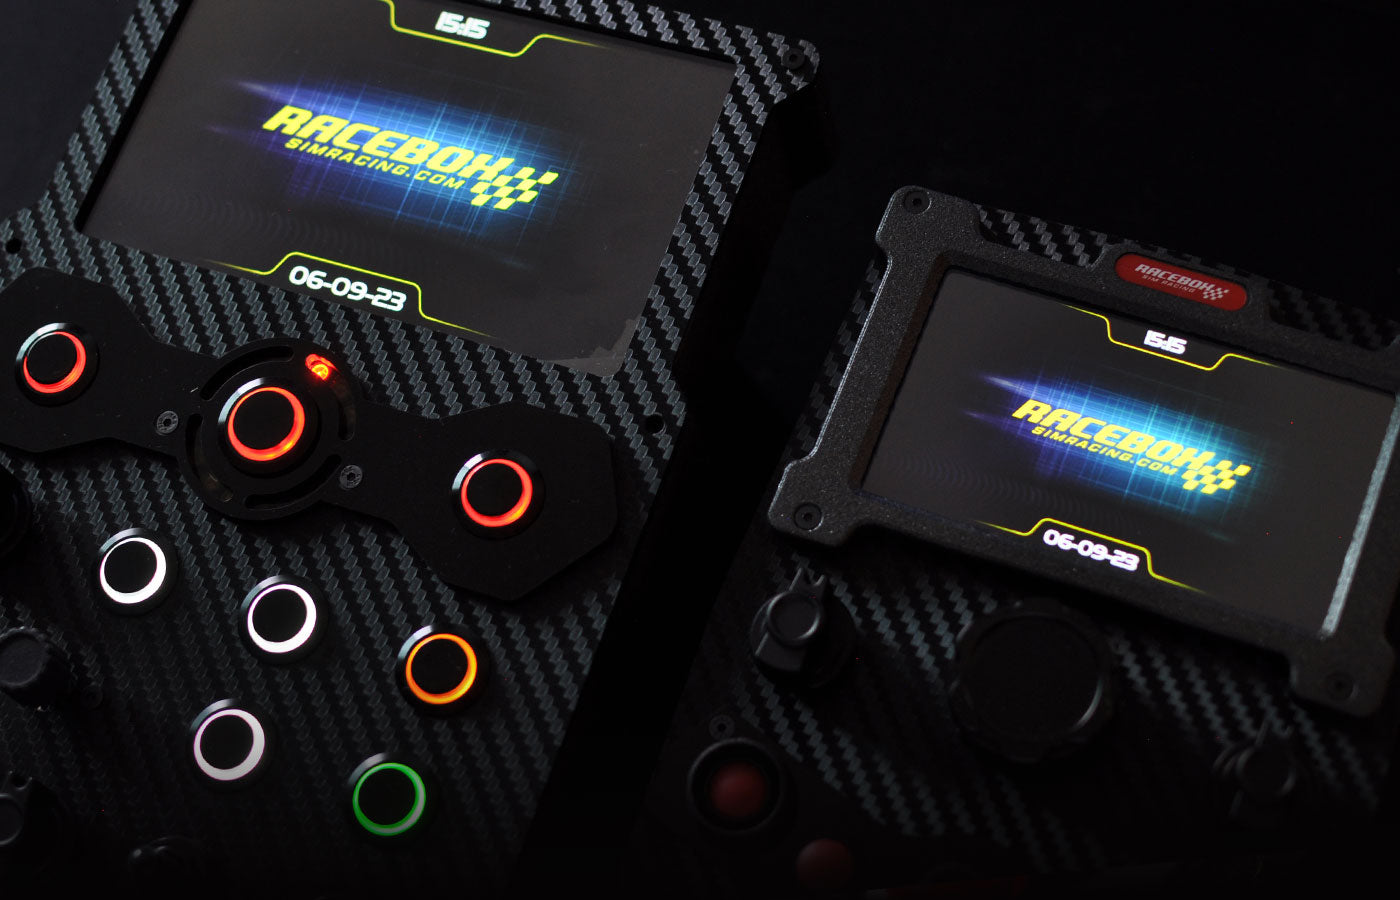 Racebox button boxes with Simhub display